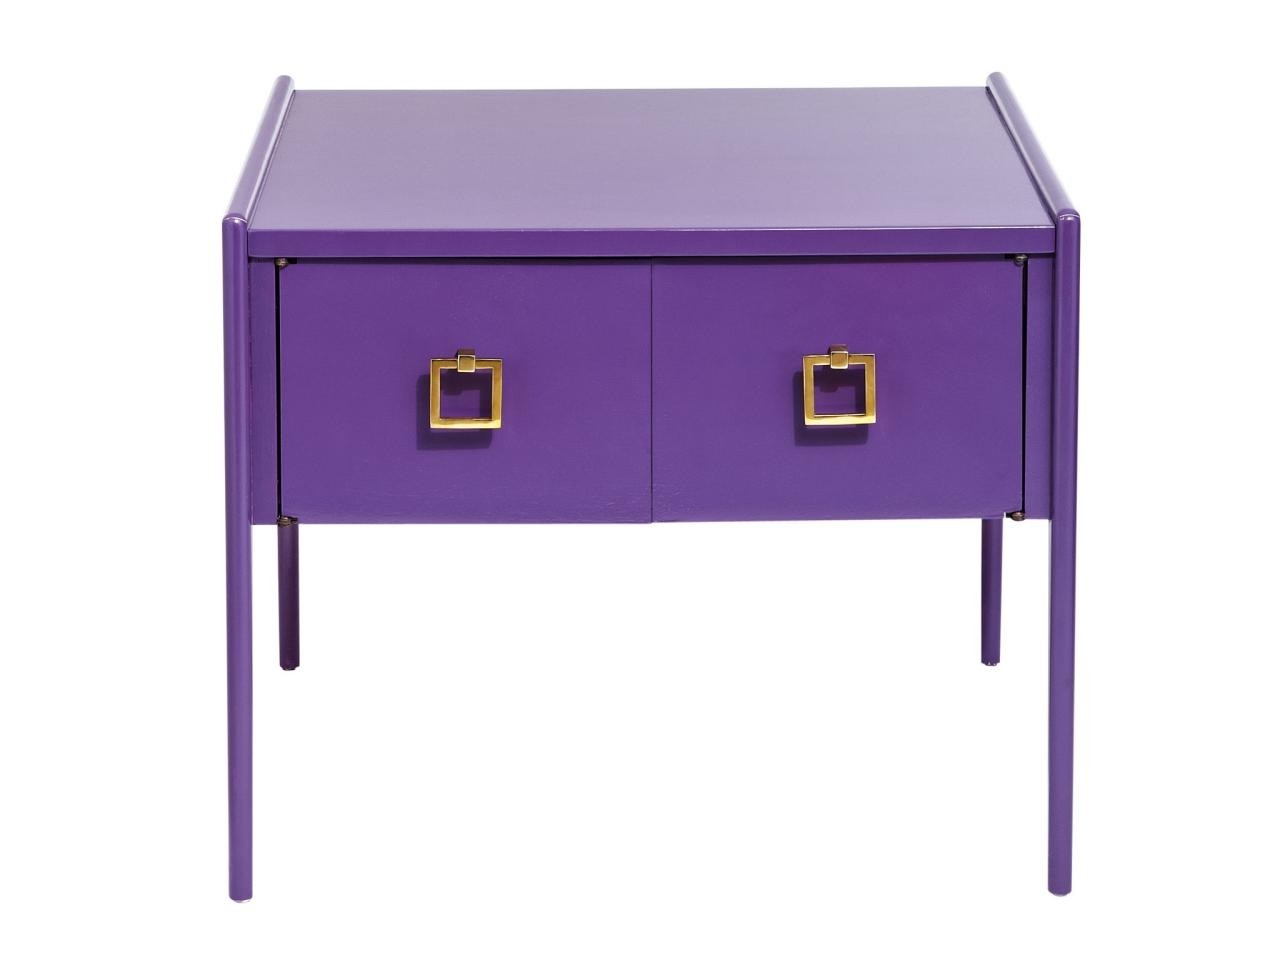 How to punchy purple end table hgtv